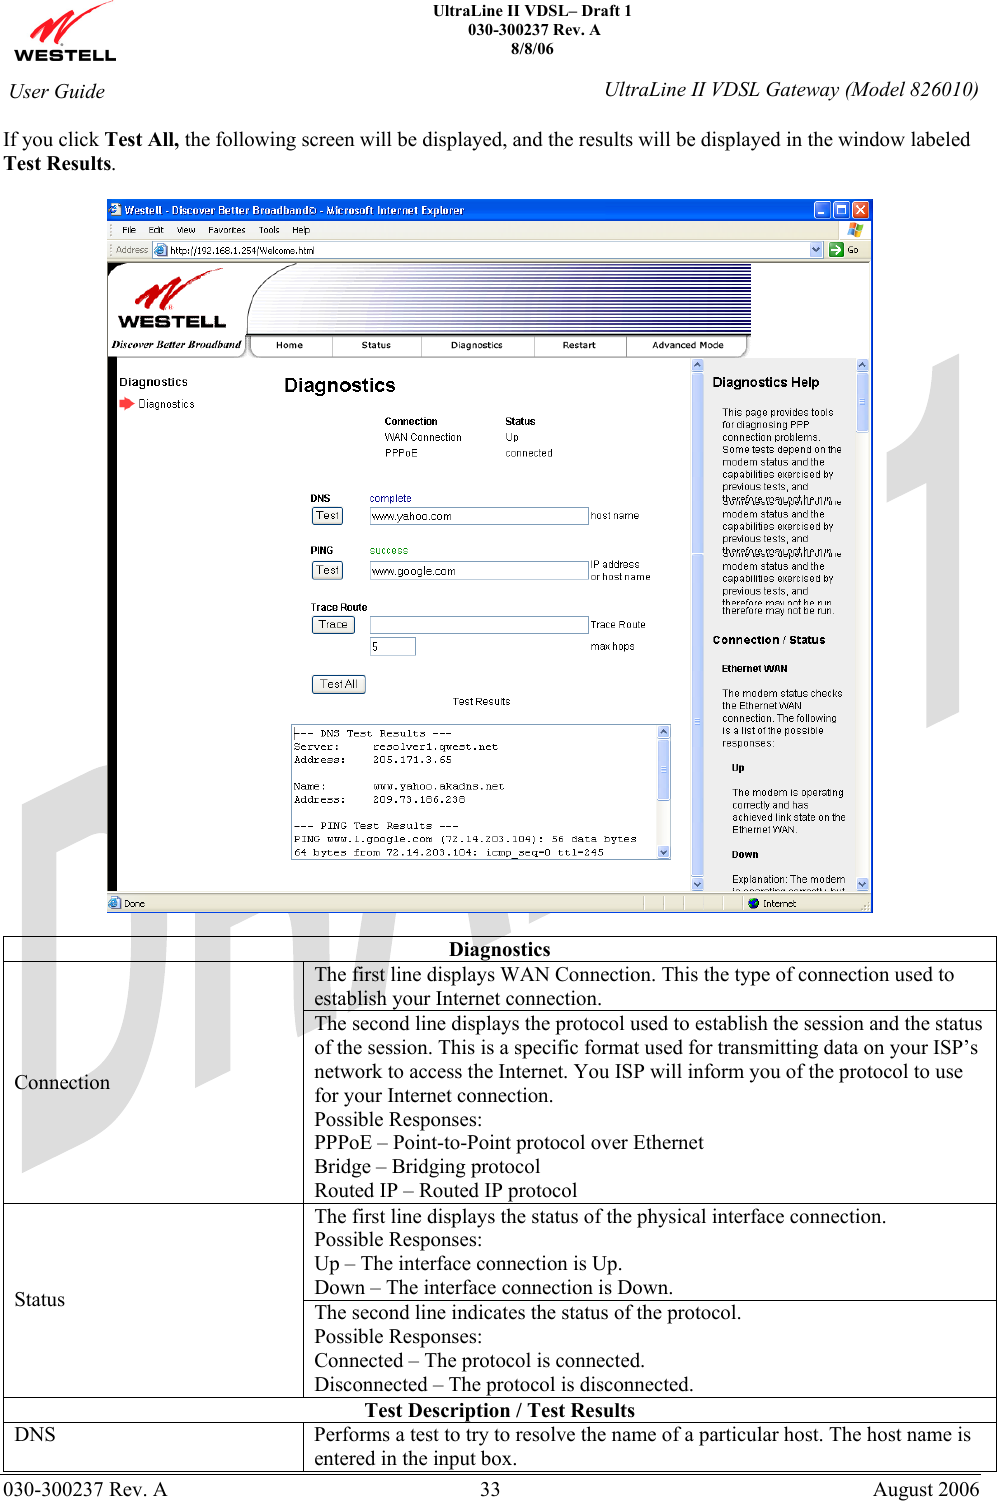    UltraLine II VDSL– Draft 1  030-300237 Rev. A 8/8/06   030-300237 Rev. A  33  August 2006  User Guide  UltraLine II VDSL Gateway (Model 826010) If you click Test All, the following screen will be displayed, and the results will be displayed in the window labeled Test Results.    Diagnostics The first line displays WAN Connection. This the type of connection used to establish your Internet connection. Connection The second line displays the protocol used to establish the session and the status of the session. This is a specific format used for transmitting data on your ISP’s network to access the Internet. You ISP will inform you of the protocol to use for your Internet connection.  Possible Responses: PPPoE – Point-to-Point protocol over Ethernet Bridge – Bridging protocol Routed IP – Routed IP protocol The first line displays the status of the physical interface connection. Possible Responses: Up – The interface connection is Up. Down – The interface connection is Down. Status  The second line indicates the status of the protocol. Possible Responses: Connected – The protocol is connected. Disconnected – The protocol is disconnected. Test Description / Test Results DNS  Performs a test to try to resolve the name of a particular host. The host name is entered in the input box. 